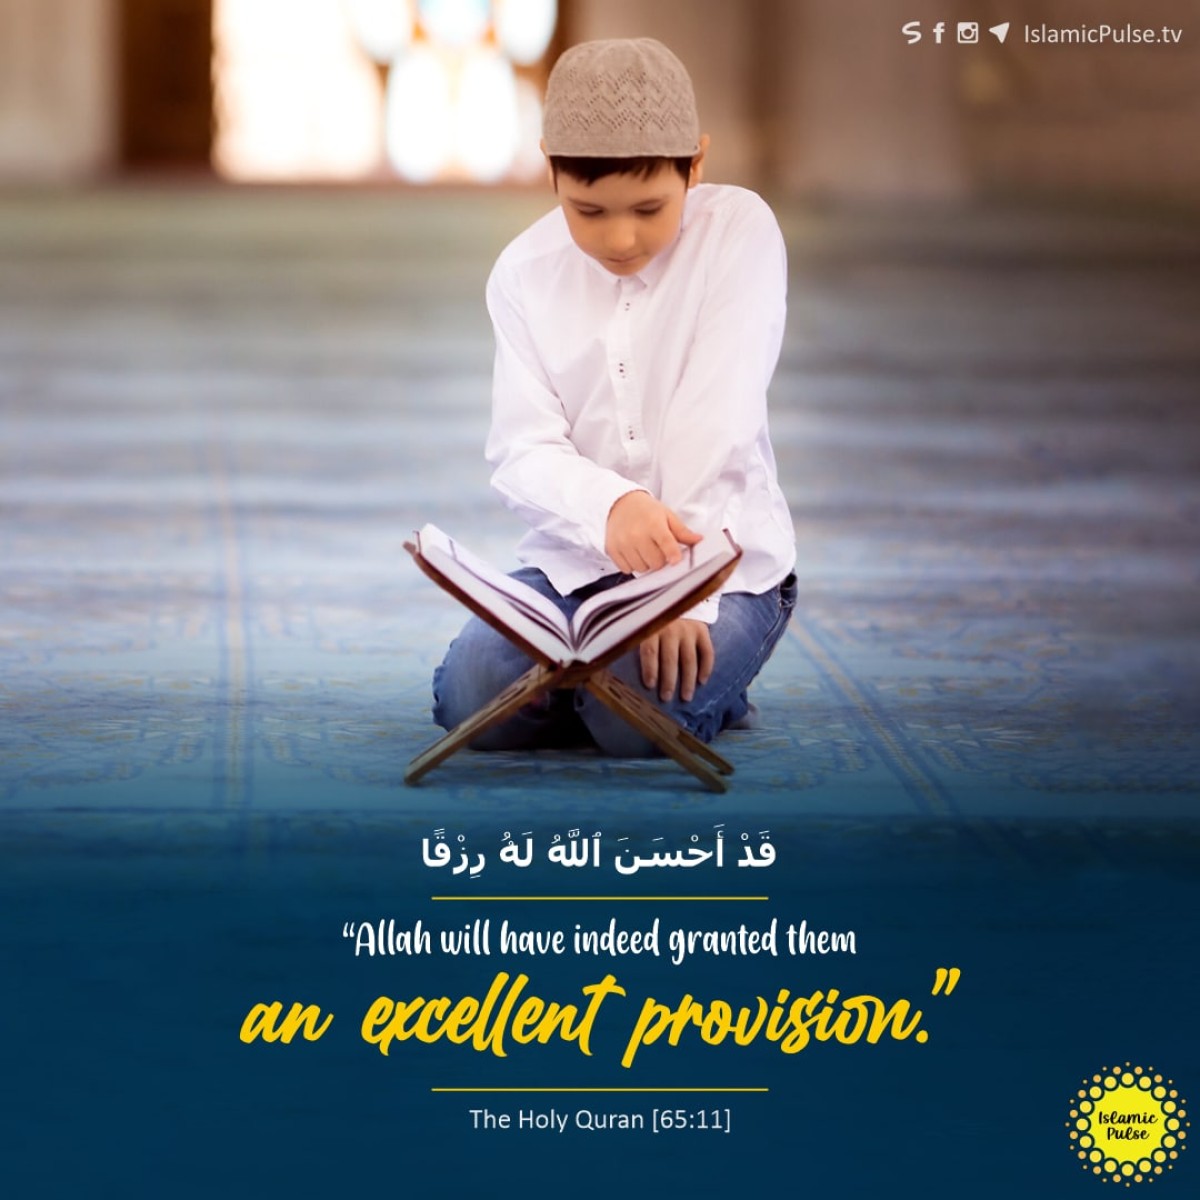 "Allah will have indeed granted them an excellent provision."